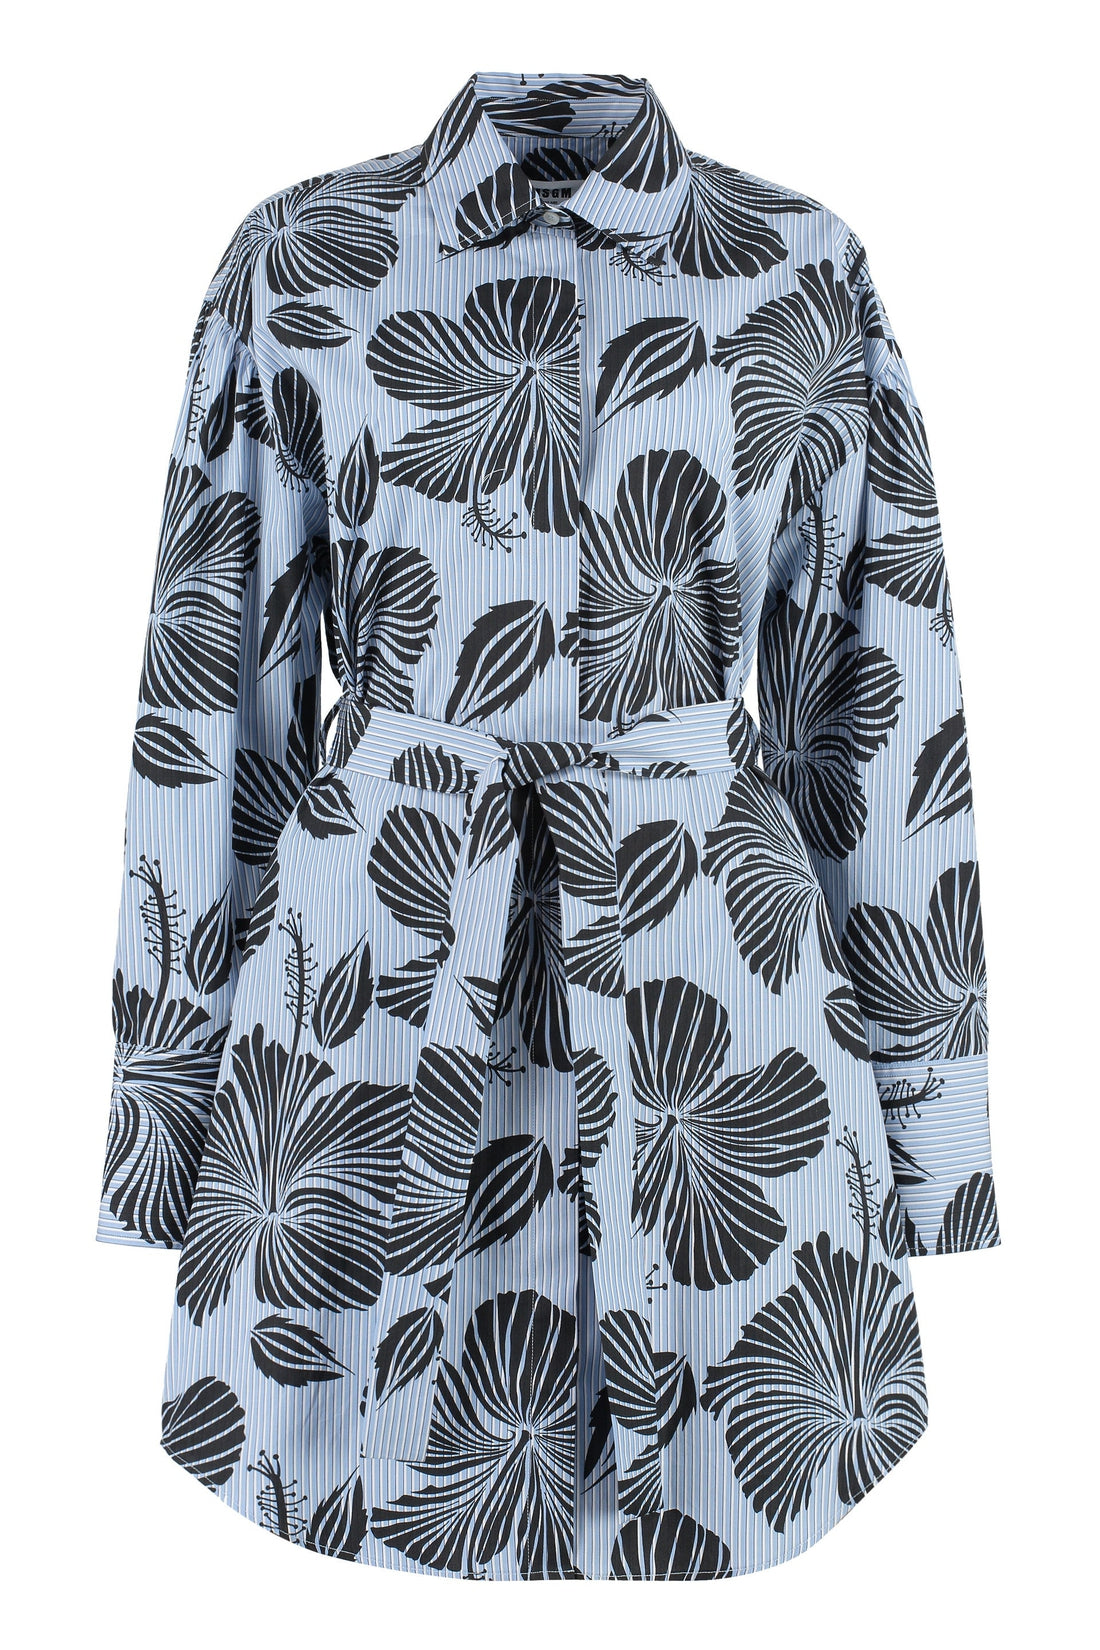 MSGM-OUTLET-SALE-Printed shirtdress-ARCHIVIST